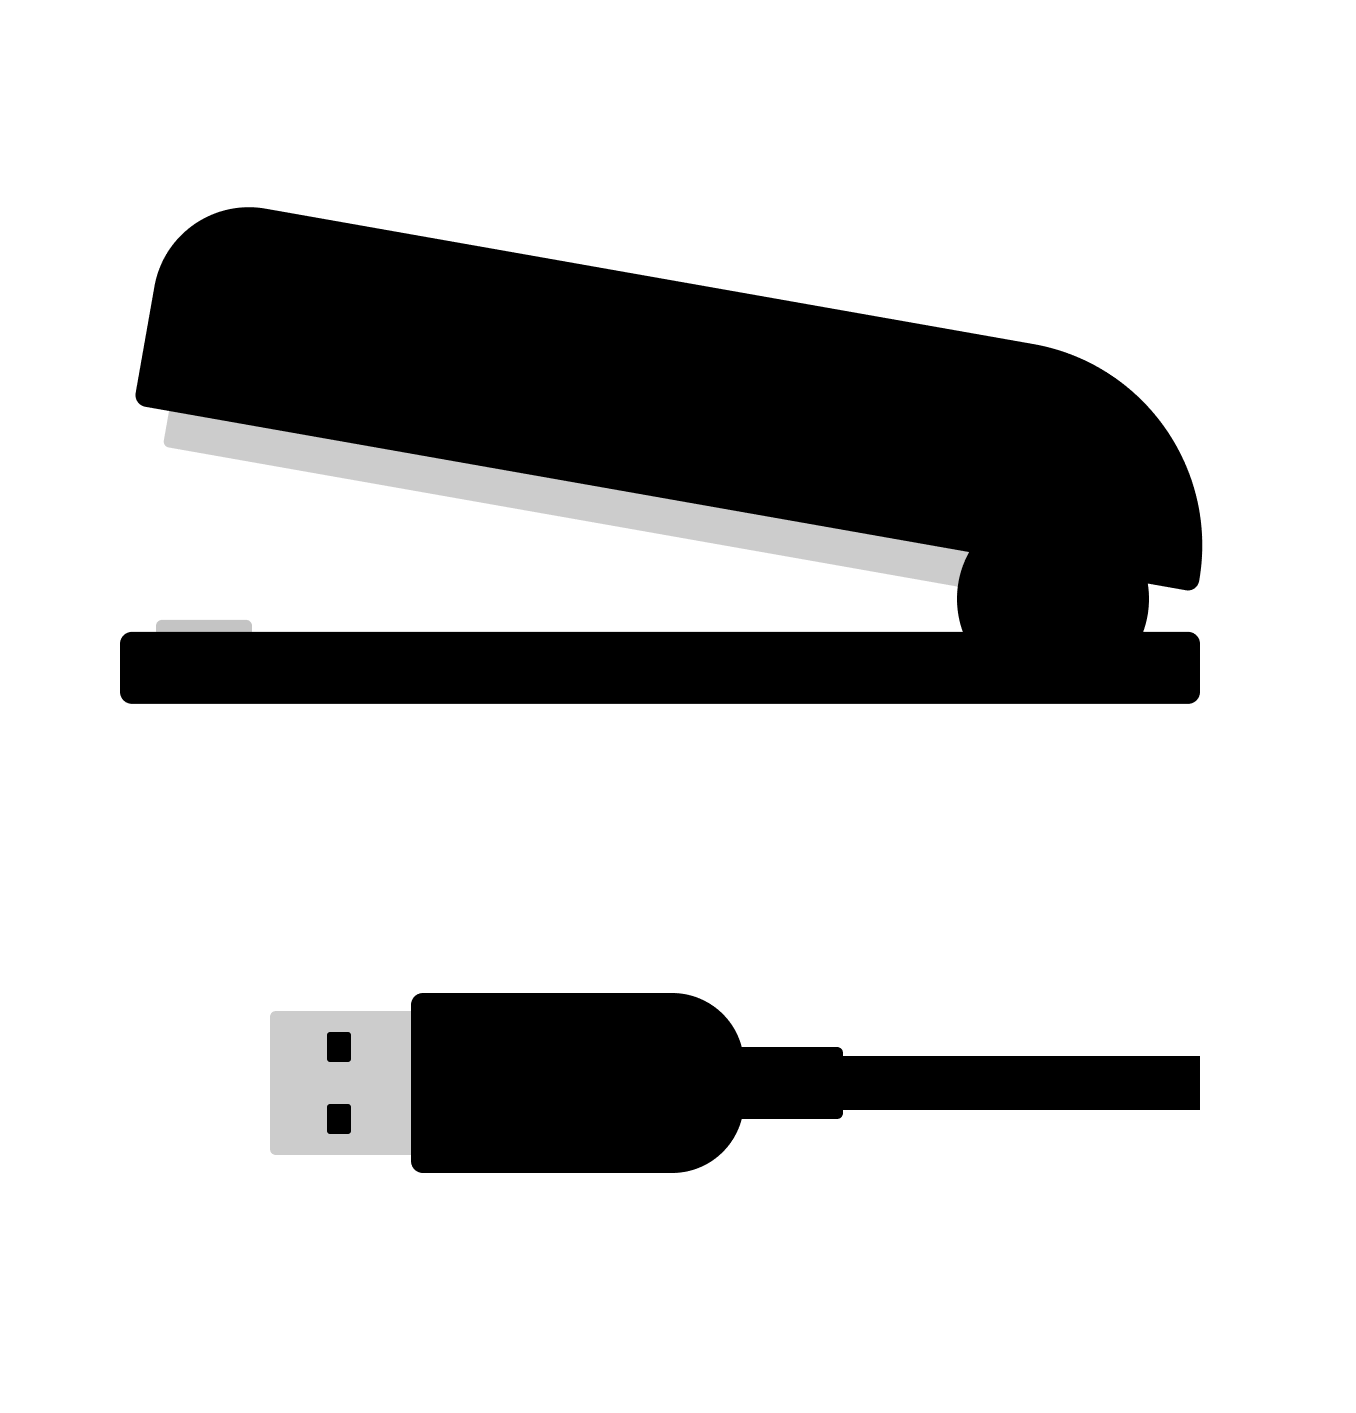 Illustration of stapler and USB cable